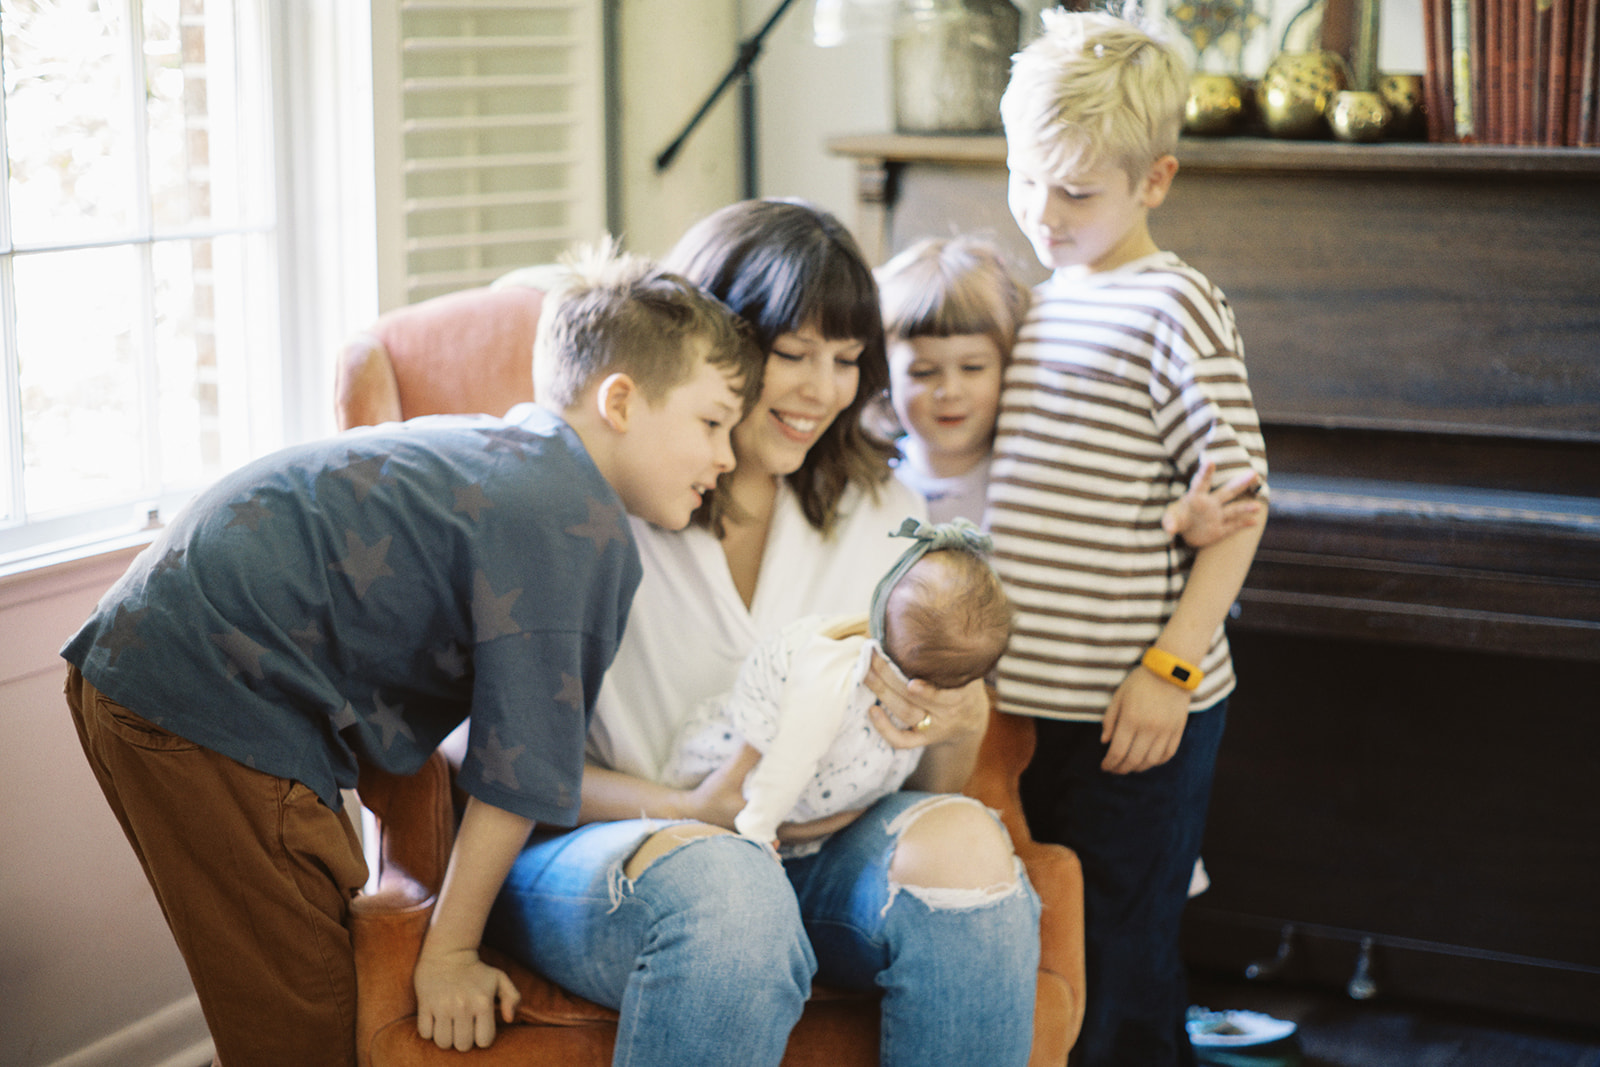 Brothers and sisters smile with mom at the new baby during an at-home lifestyle session